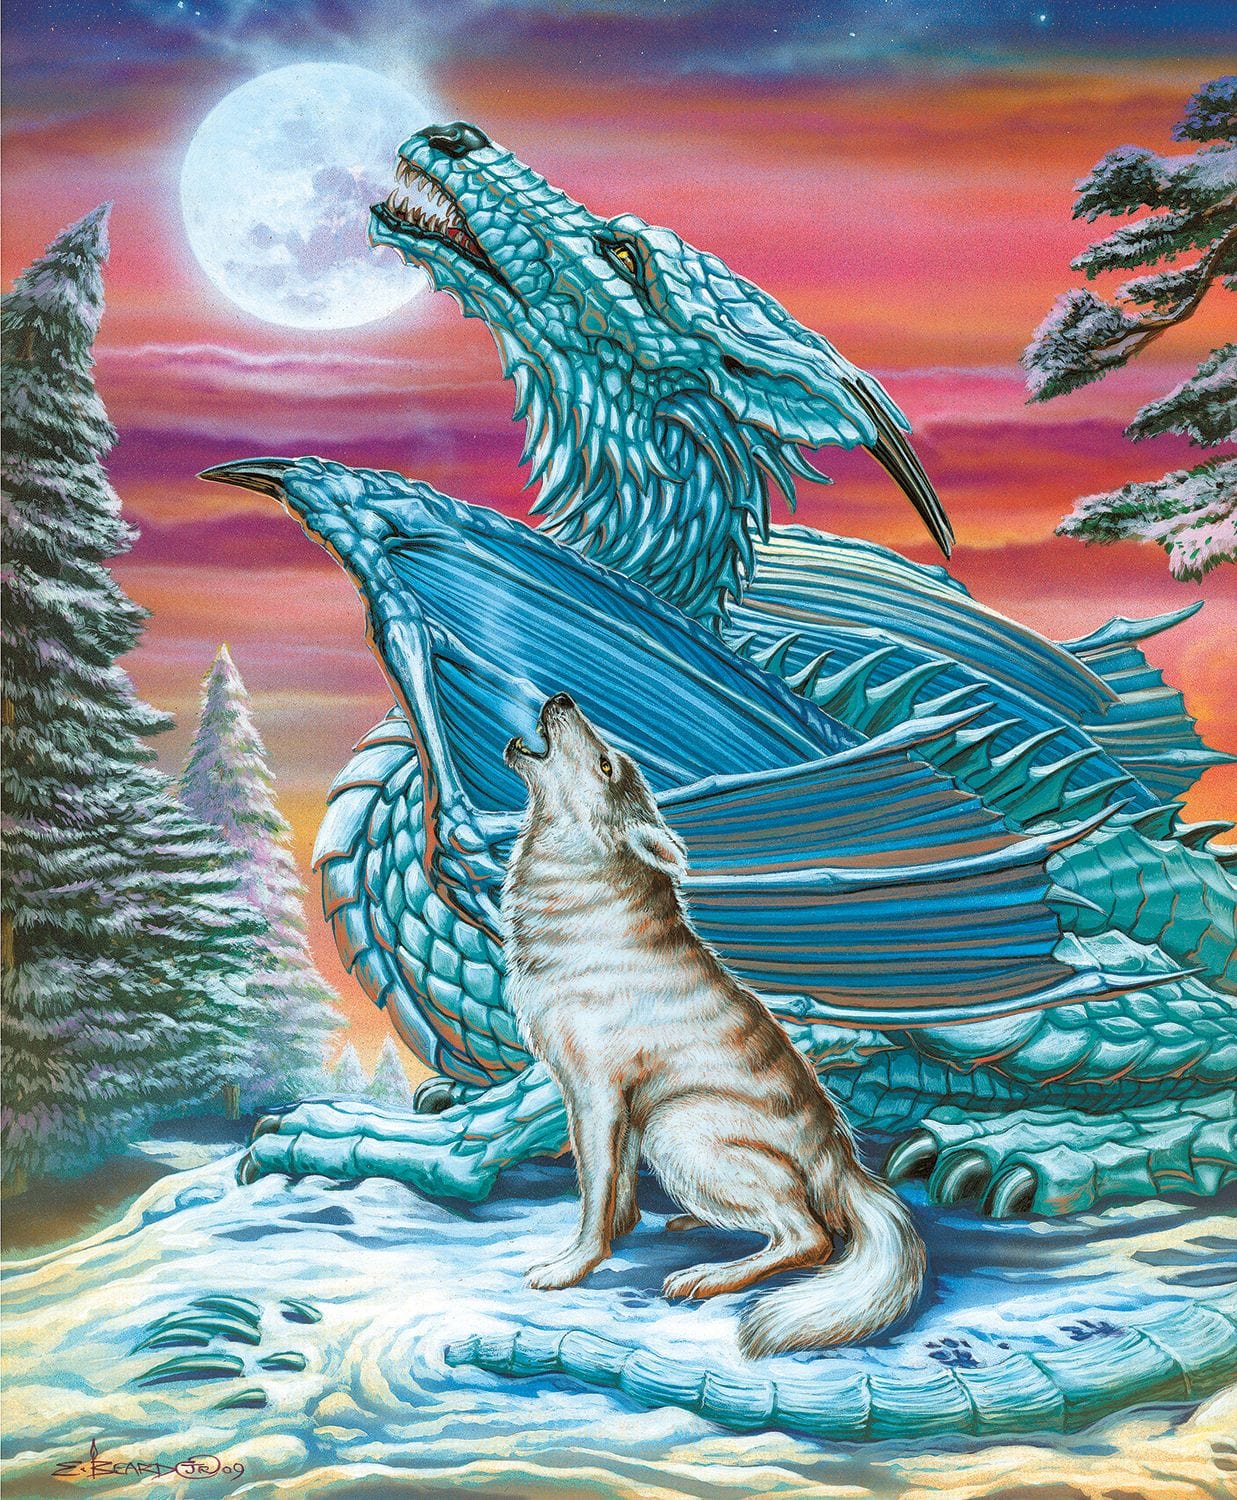 Moon Song Dragon & Wolf Jigsaw Puzzle, Autism Toys For Kids, Adults, Whimsical Jigsaw Puzzle